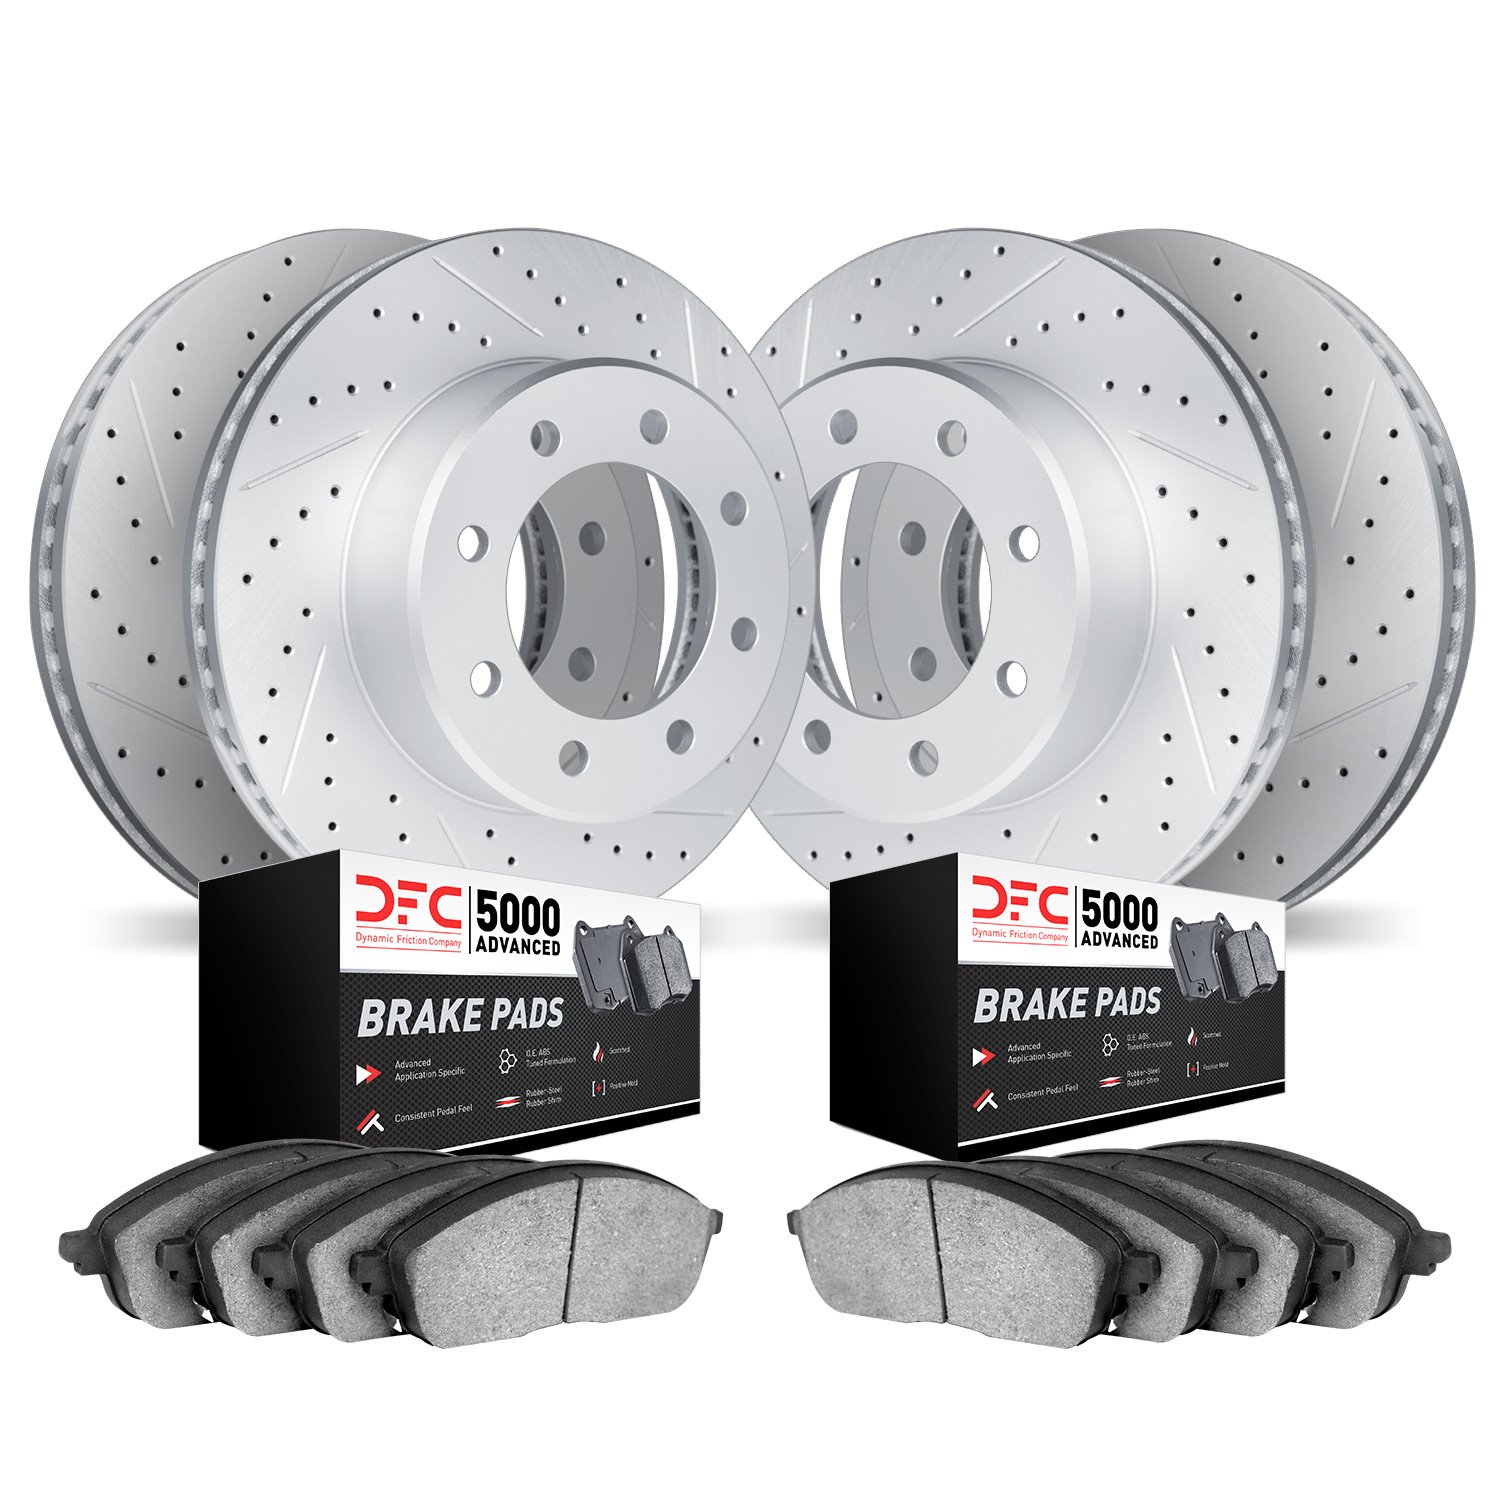 2504-54274 Geoperformance Drilled/Slotted Rotors w/5000 Advanced Brake Pads Kit, 2005-2010 Ford/Lincoln/Mercury/Mazda, Position: